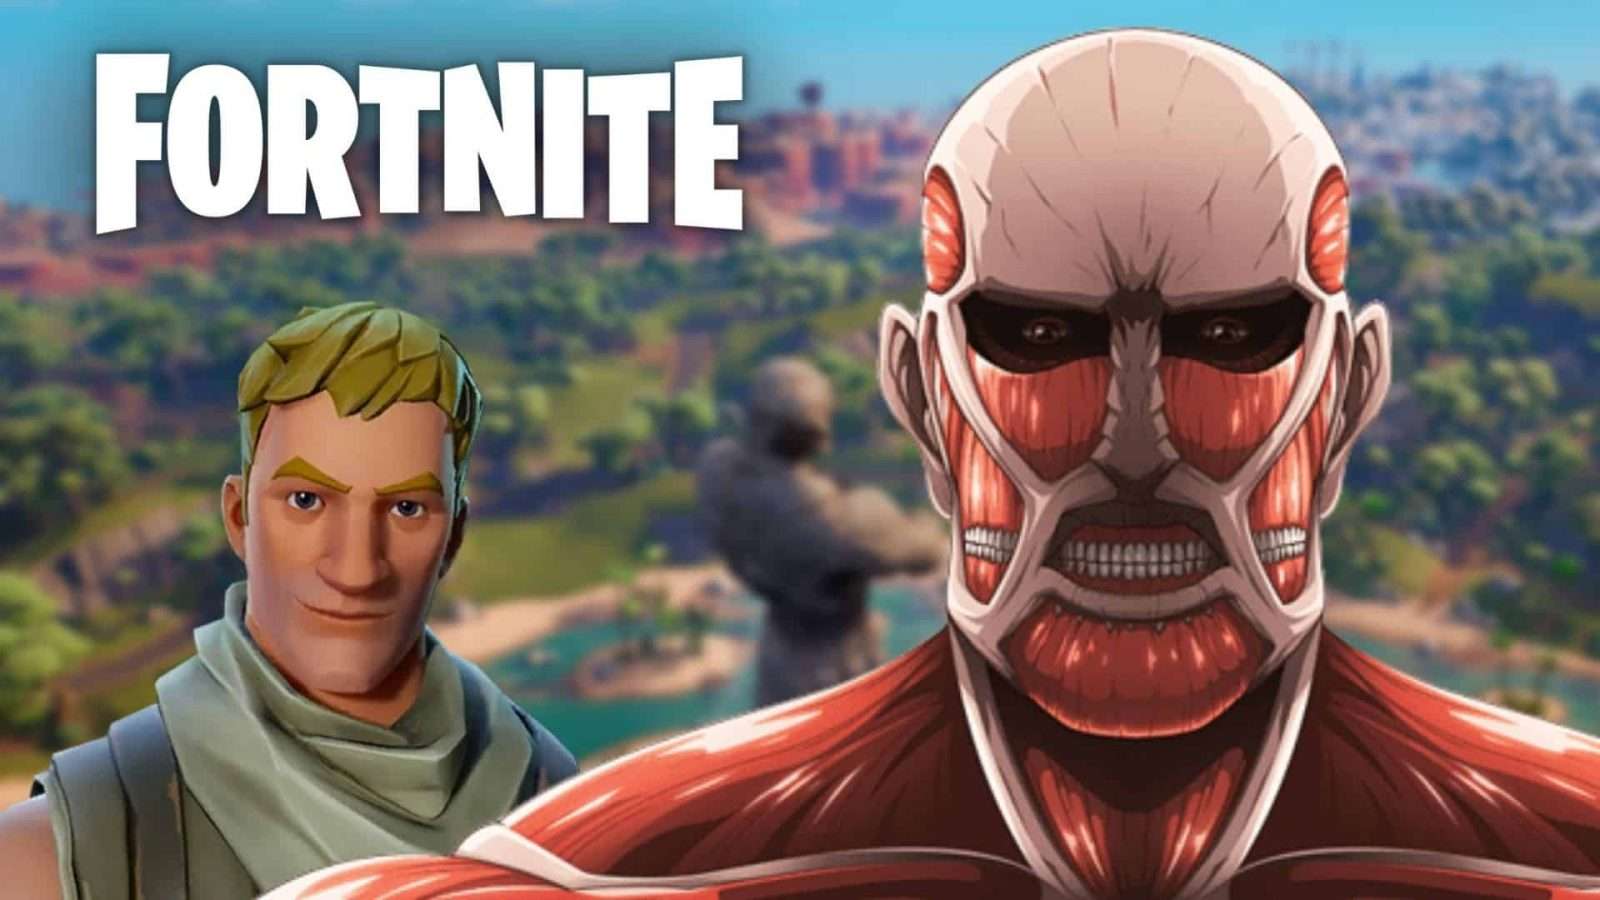 jonesy from fortnite and colossal titan from aot